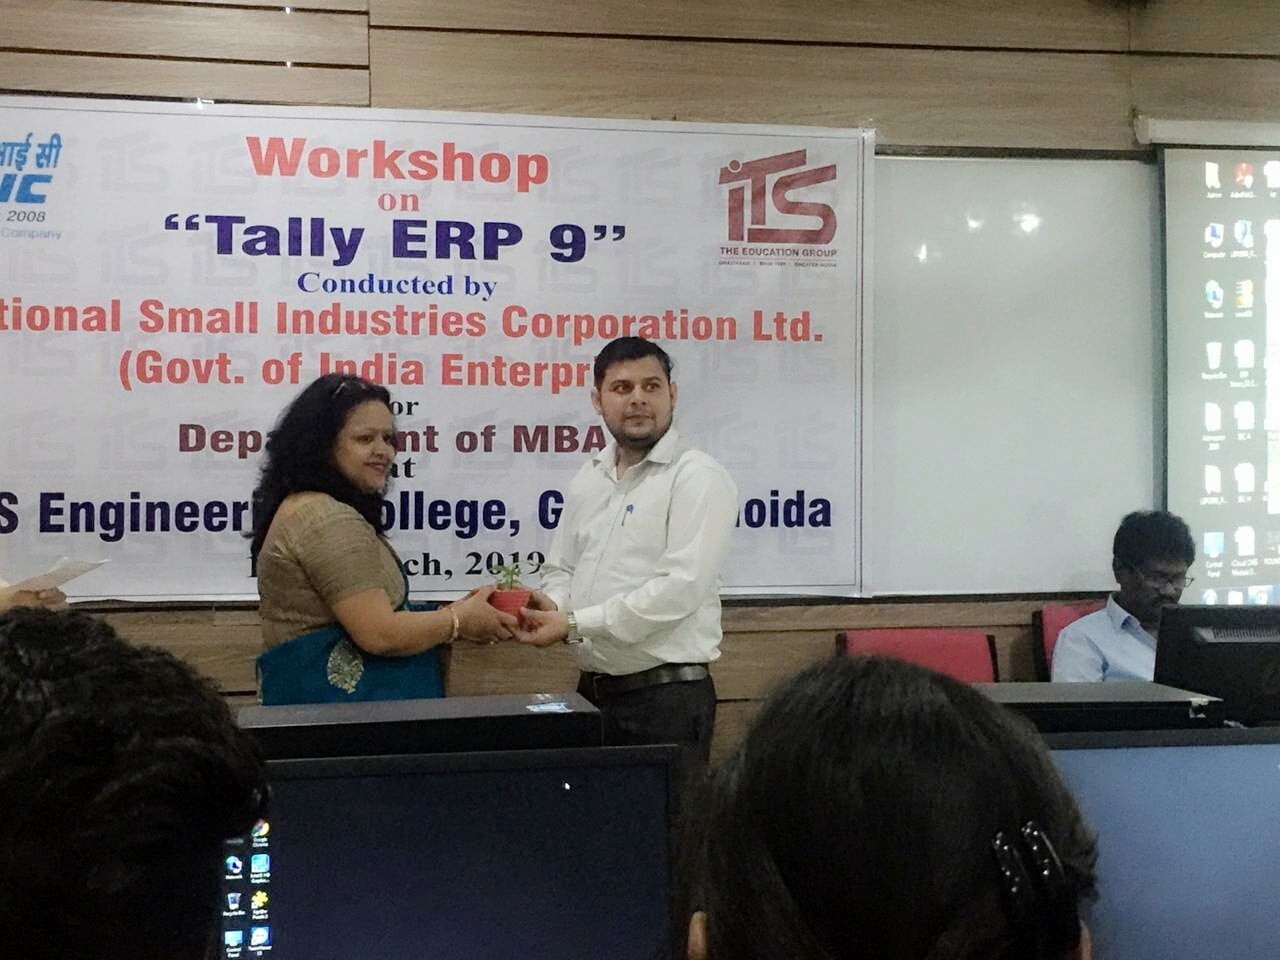 Workshop Conducted on Tally ERP 9.0 